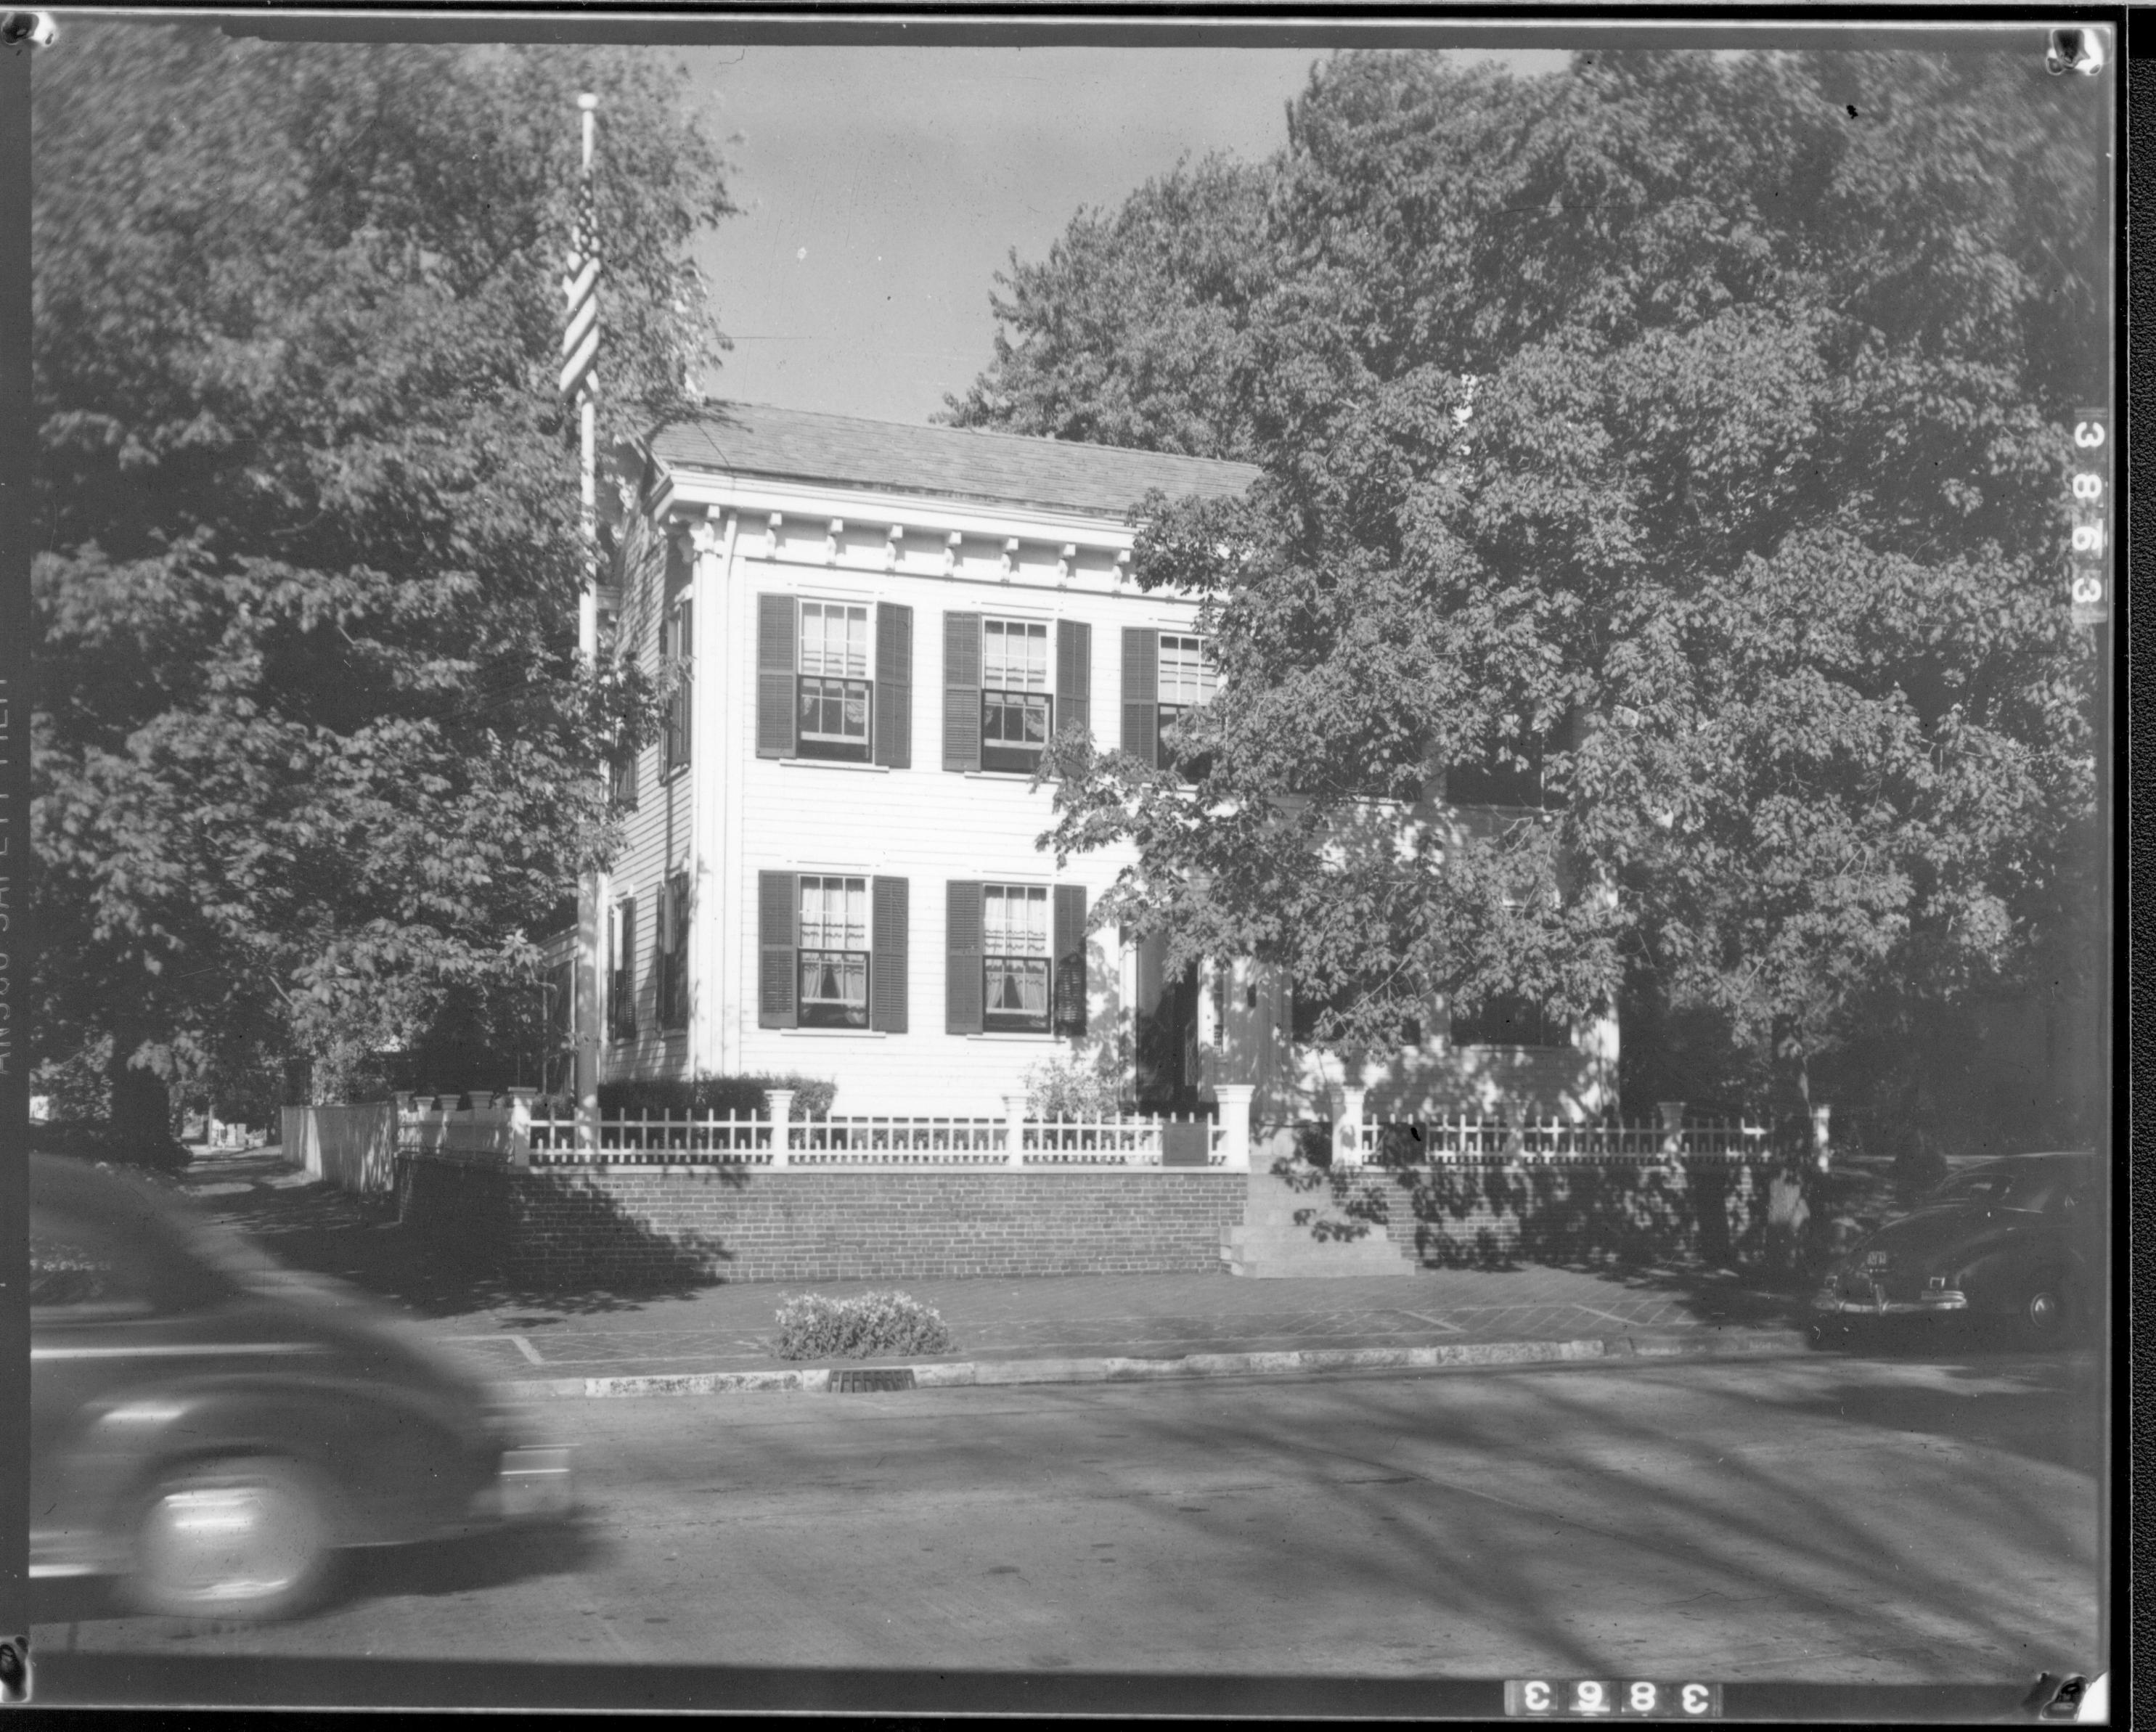 Lincoln Home (reverse image) west (front) elevation in summer surrounded by trees as car drives past on 8th Street. and another with visitor is parked in front on right.  Windows are open with black screens in front. Paved street. House appears to be painted white. Looking East from 8th and Jackson Street intersection Lincoln Home, 8th Street, painted white, cars, visitors, summer